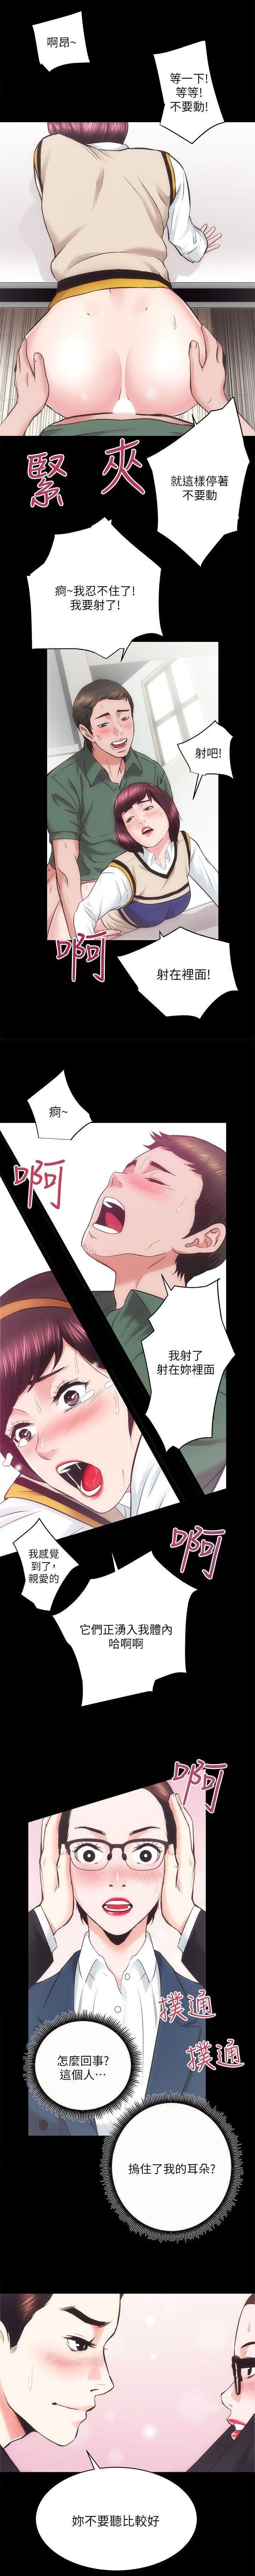 Cheating Wife 性溢房屋 Chapter 17-20 Full Movie - Page 7